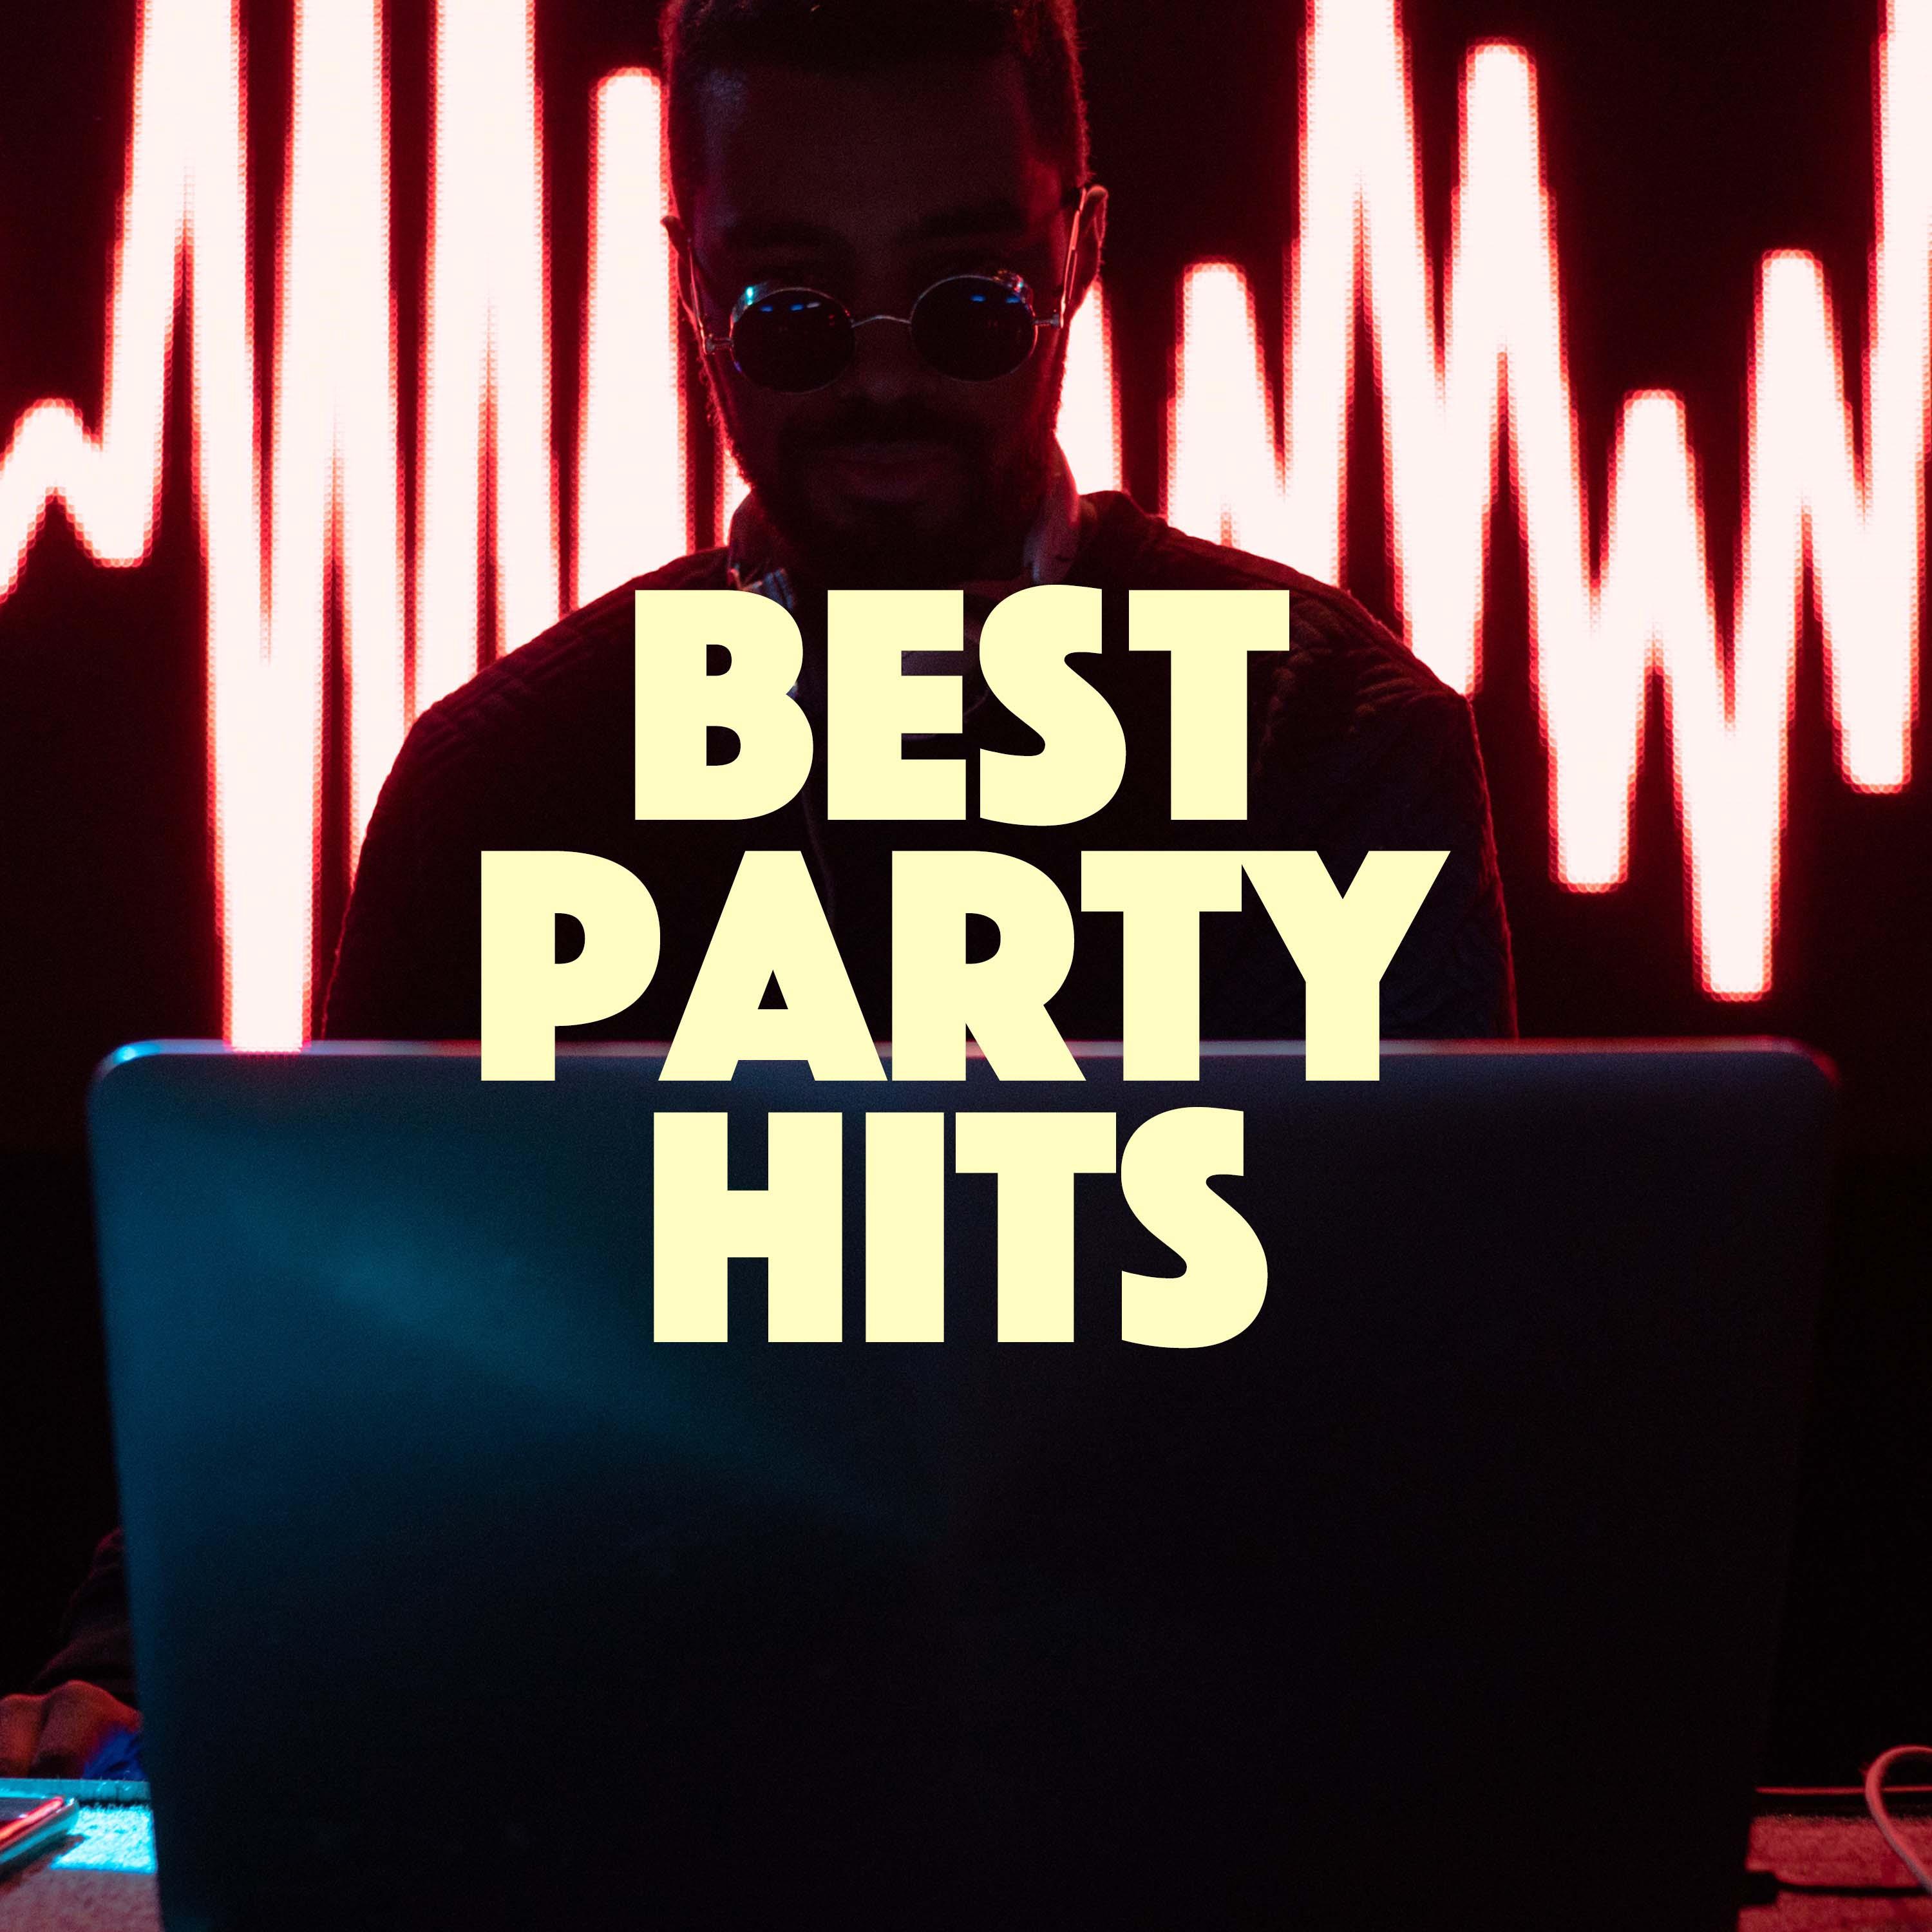 Best Party Hits CD - Top Electronic Mix 2018 for College Parties and Nightlife